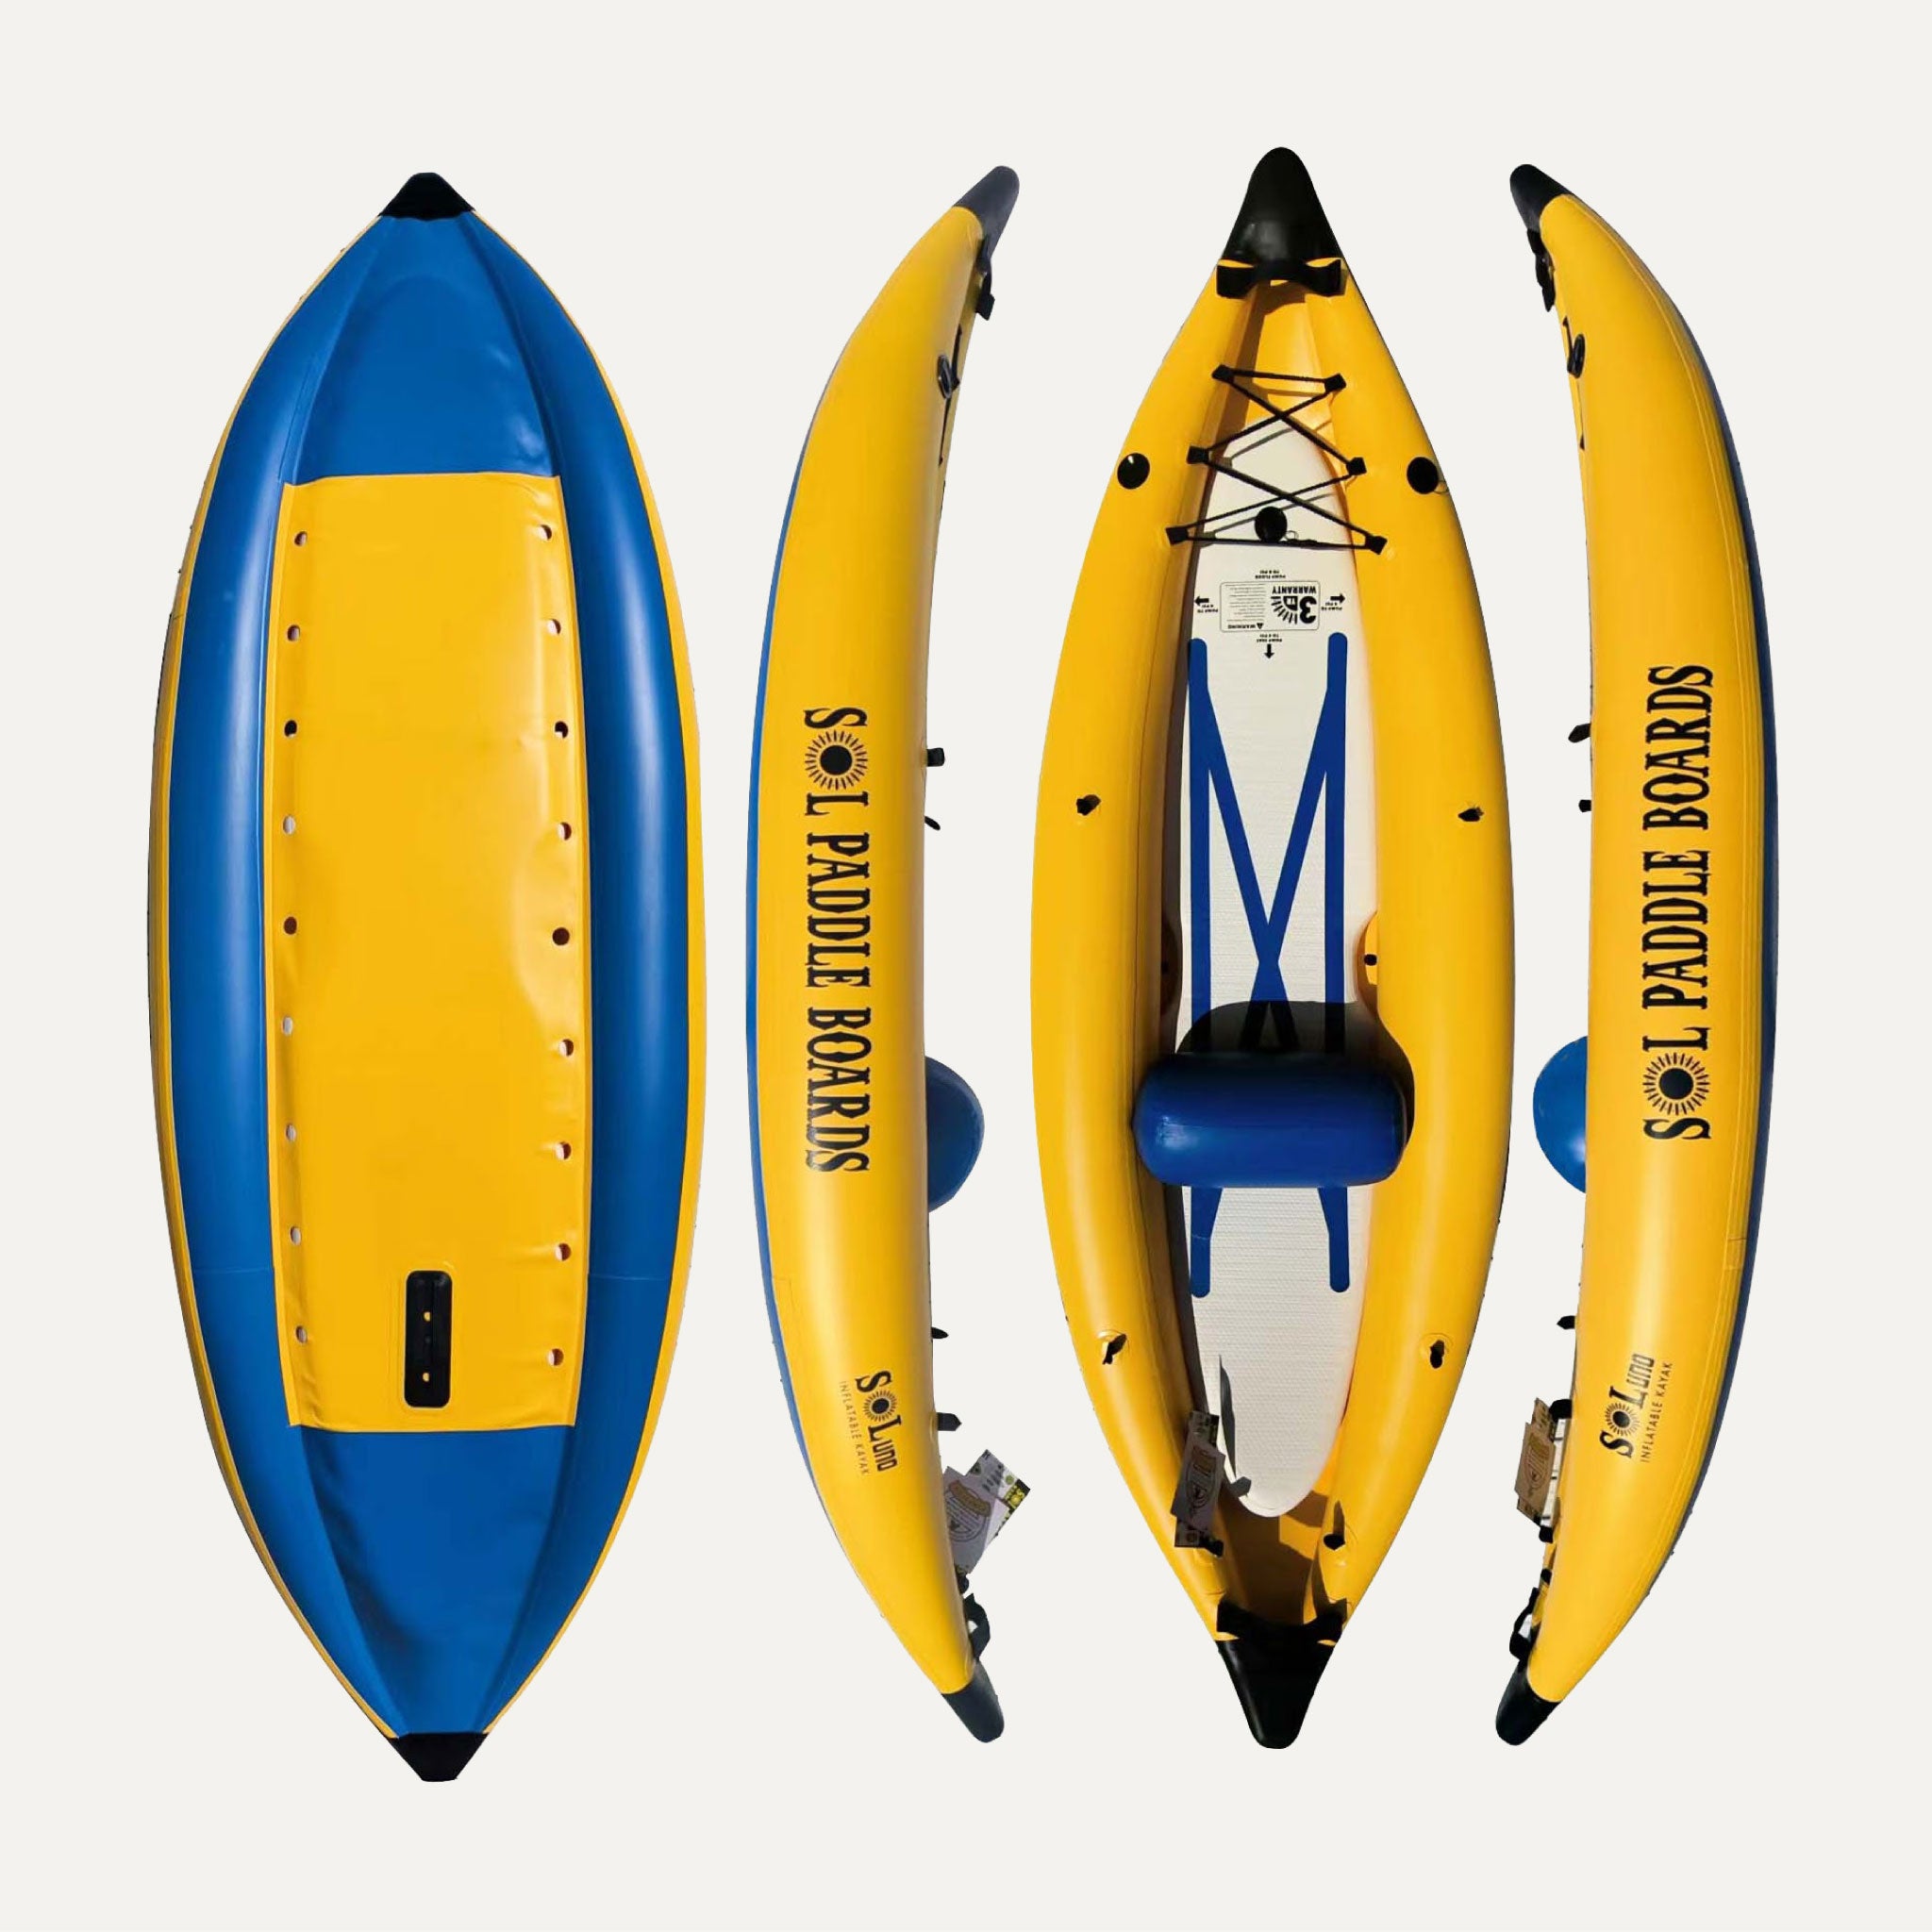 GalaXy SOLuno Single Inflatable Kayak showcasing all four sides of the kayak